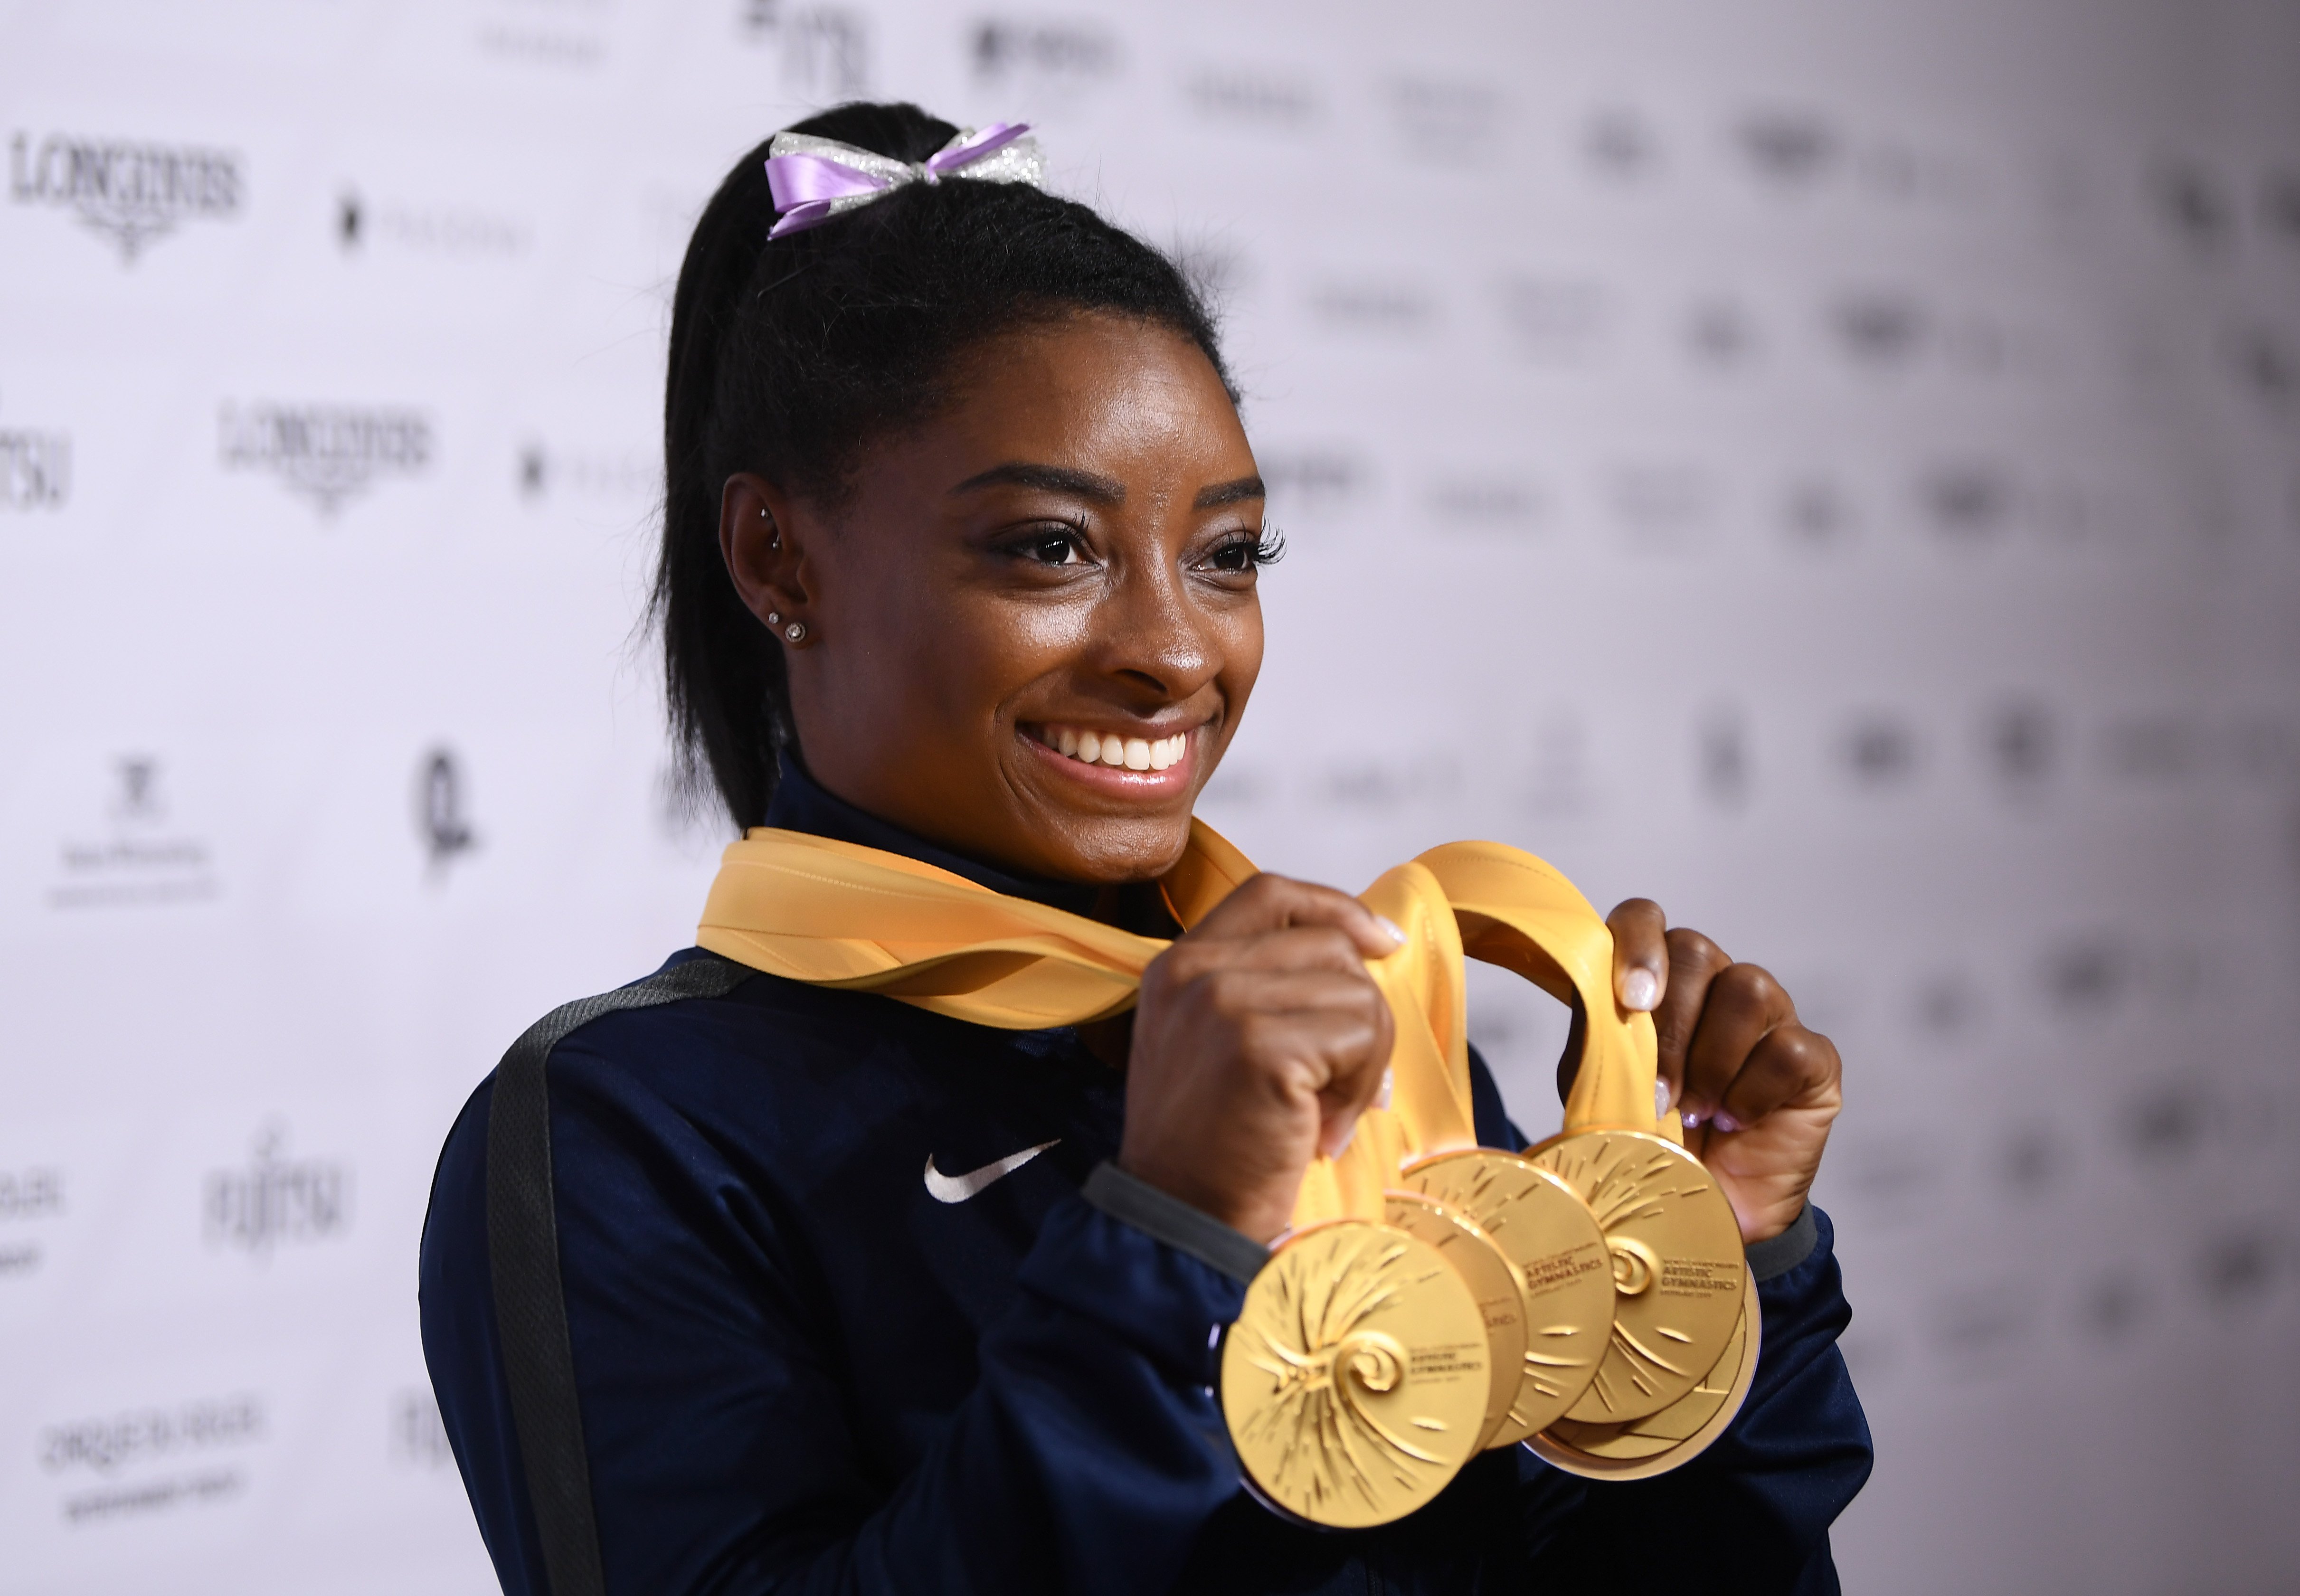 Simone Biles at the FIG Artistic Gymnastics World Championships at Hanns Martin Schleyer Hall on October 13, 2019 in Stuttgart, Germany. | Source: Getty Images